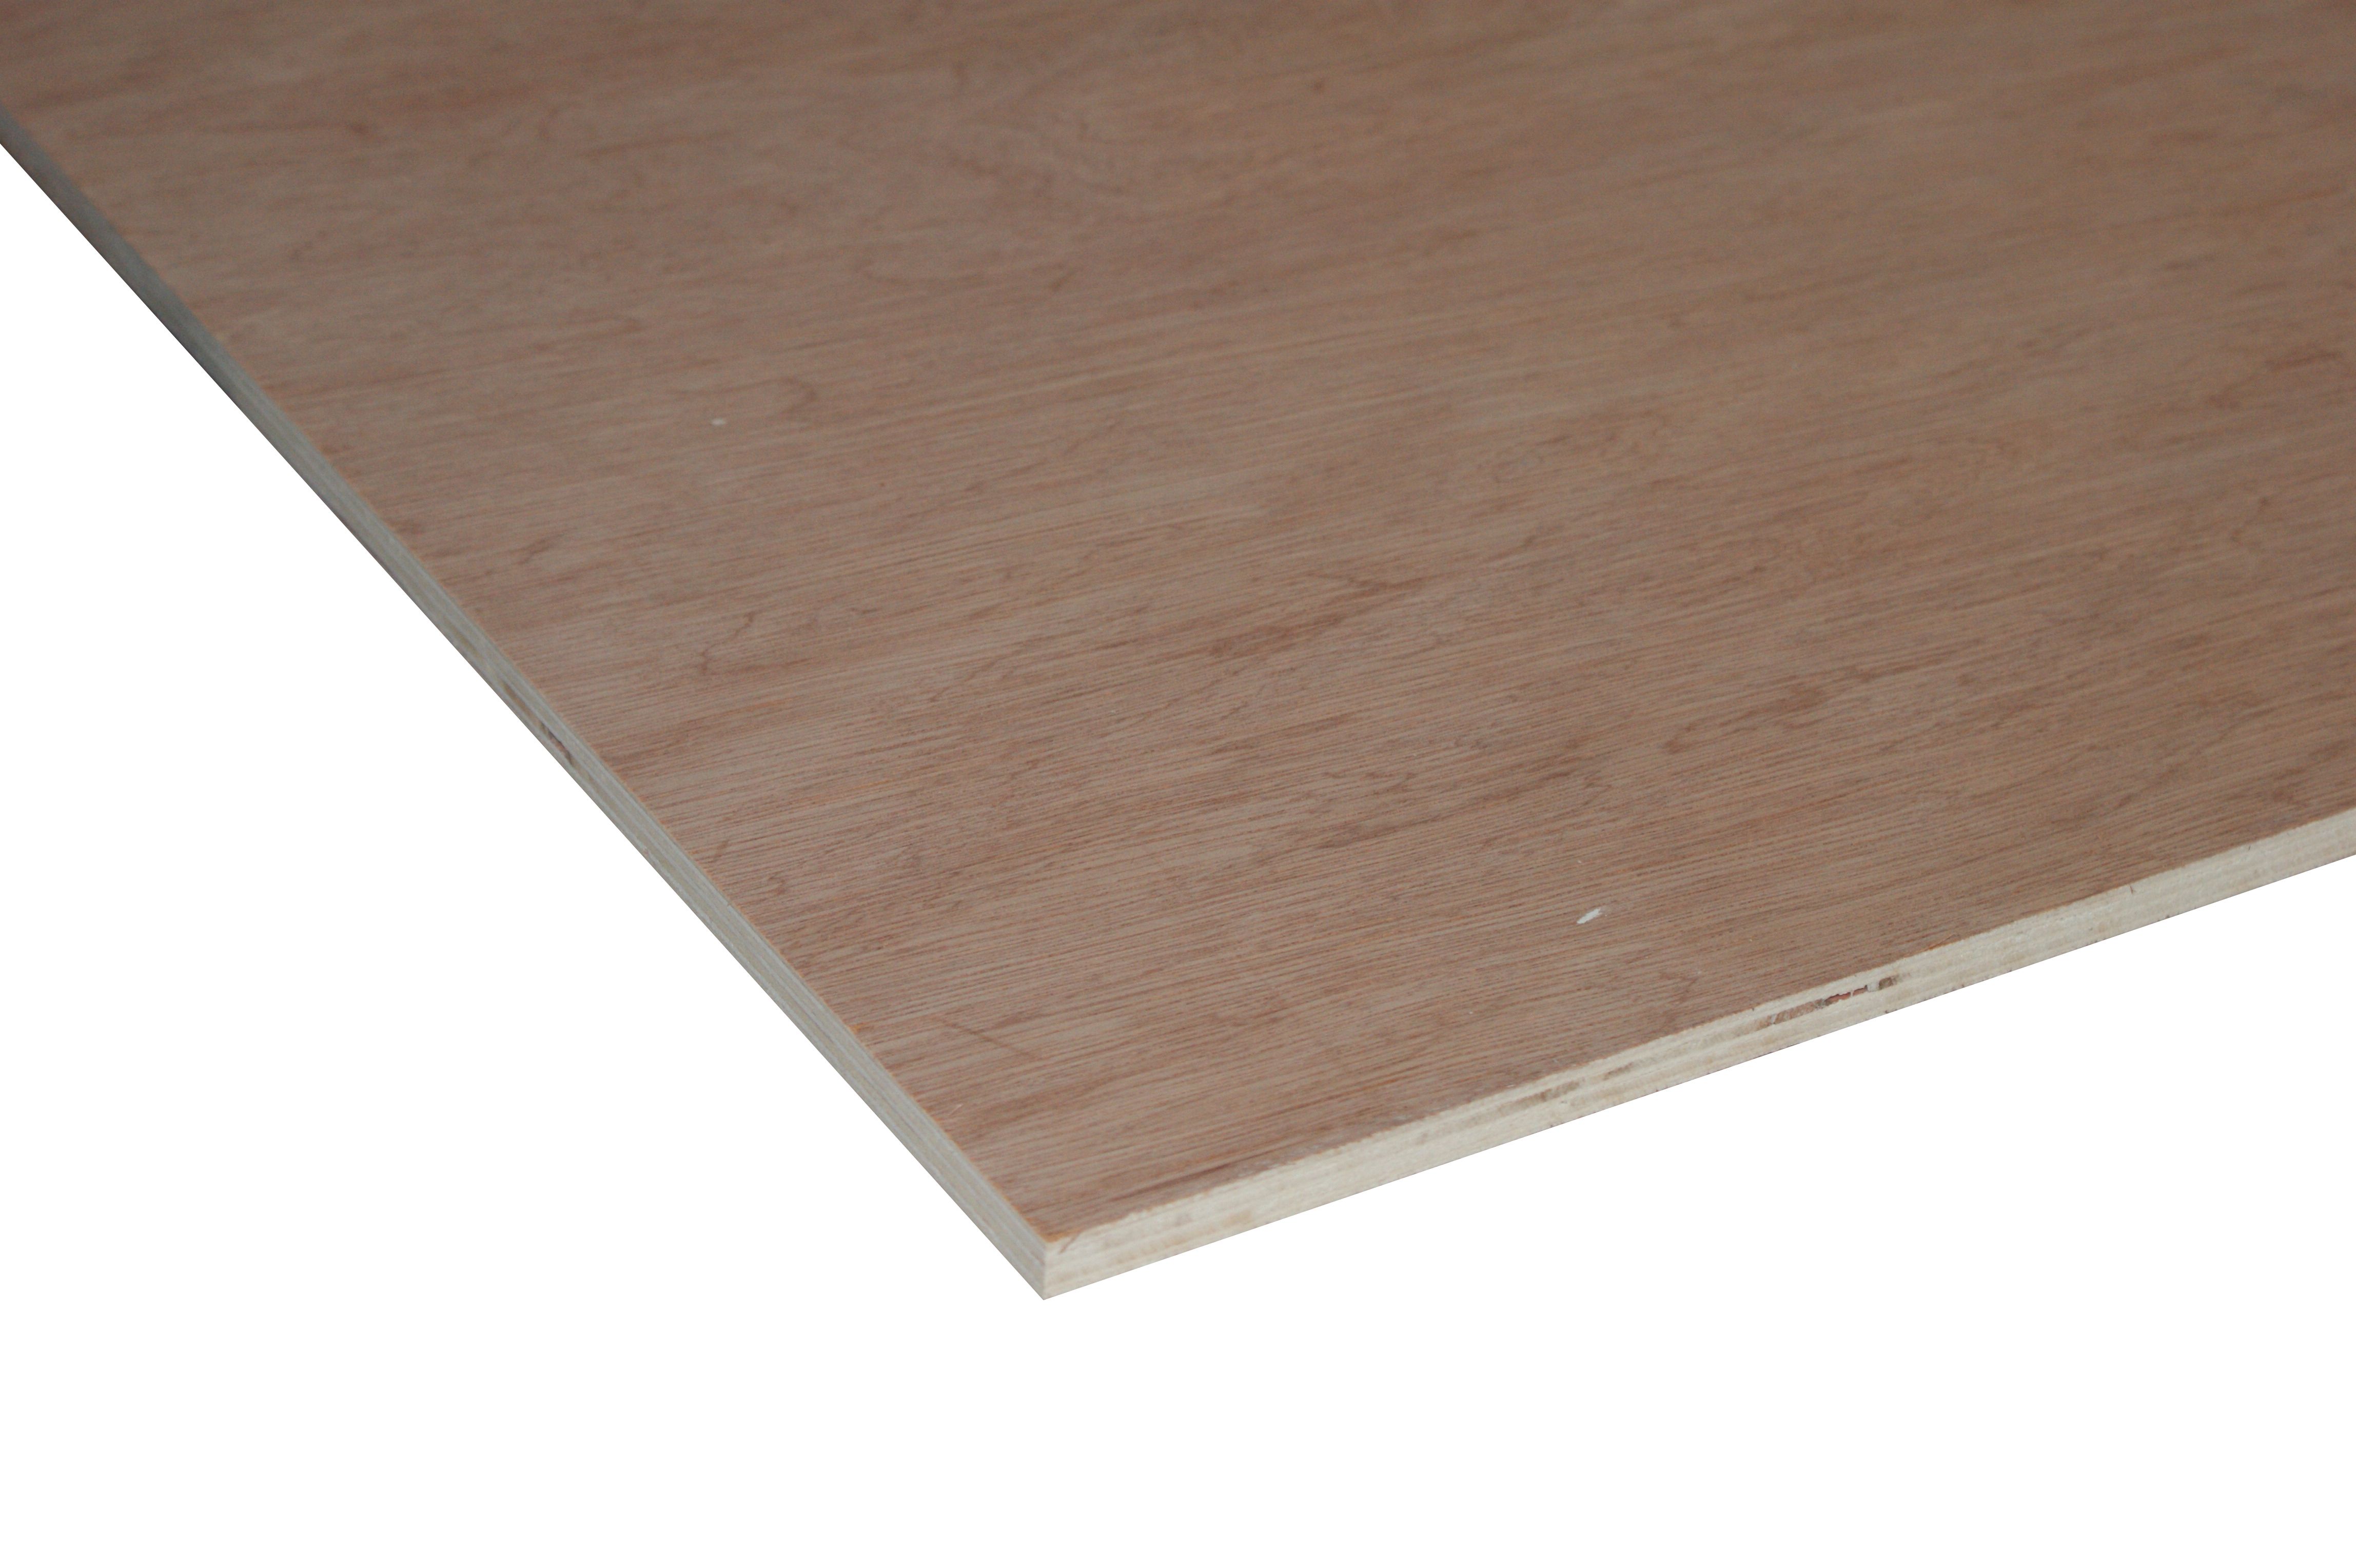 Image of Wickes Versatile Non-Structural Hardwood Natural Plywood - 3.6x606x1220mm